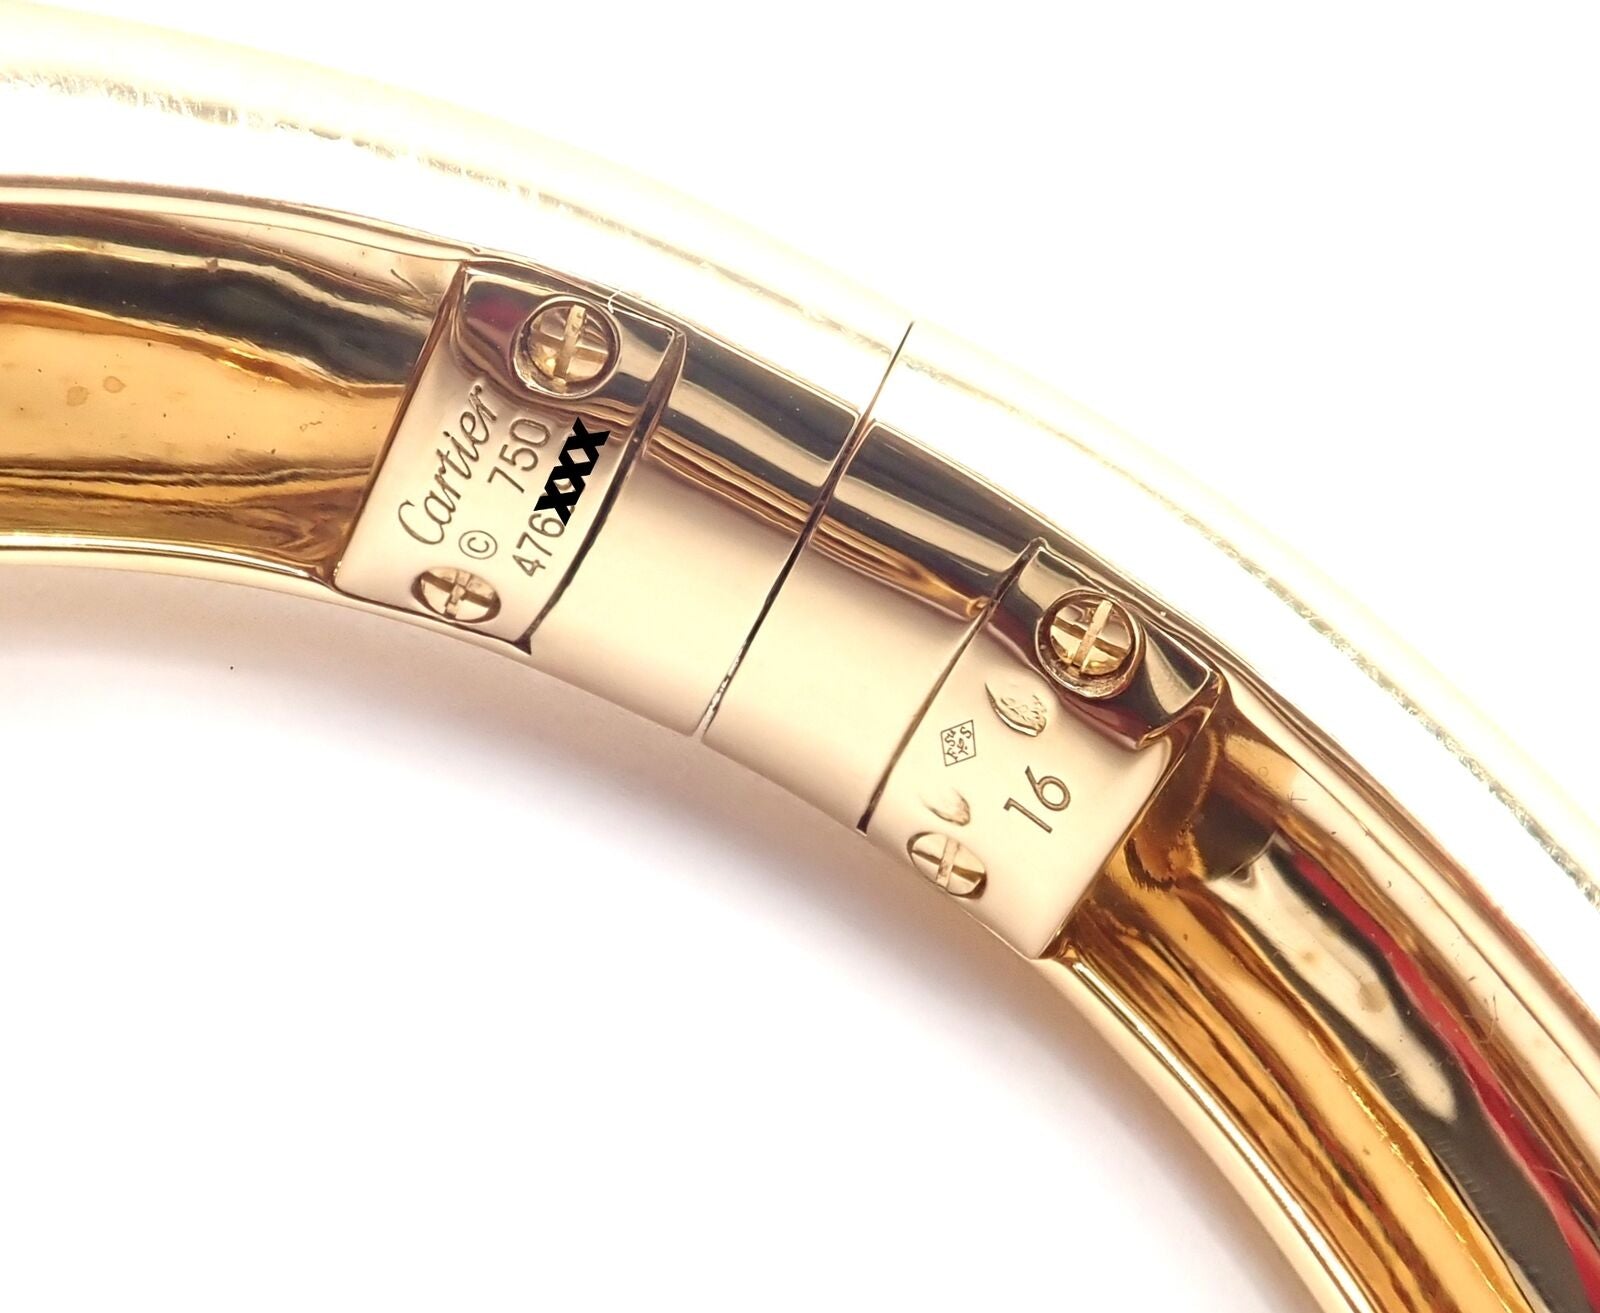 Cartier Jewelry & Watches:Fine Jewelry:Bracelets & Charms Authentic! Cartier Panther Panthere 18k Yellow Gold Bangle Bracelet Size 16 Cert